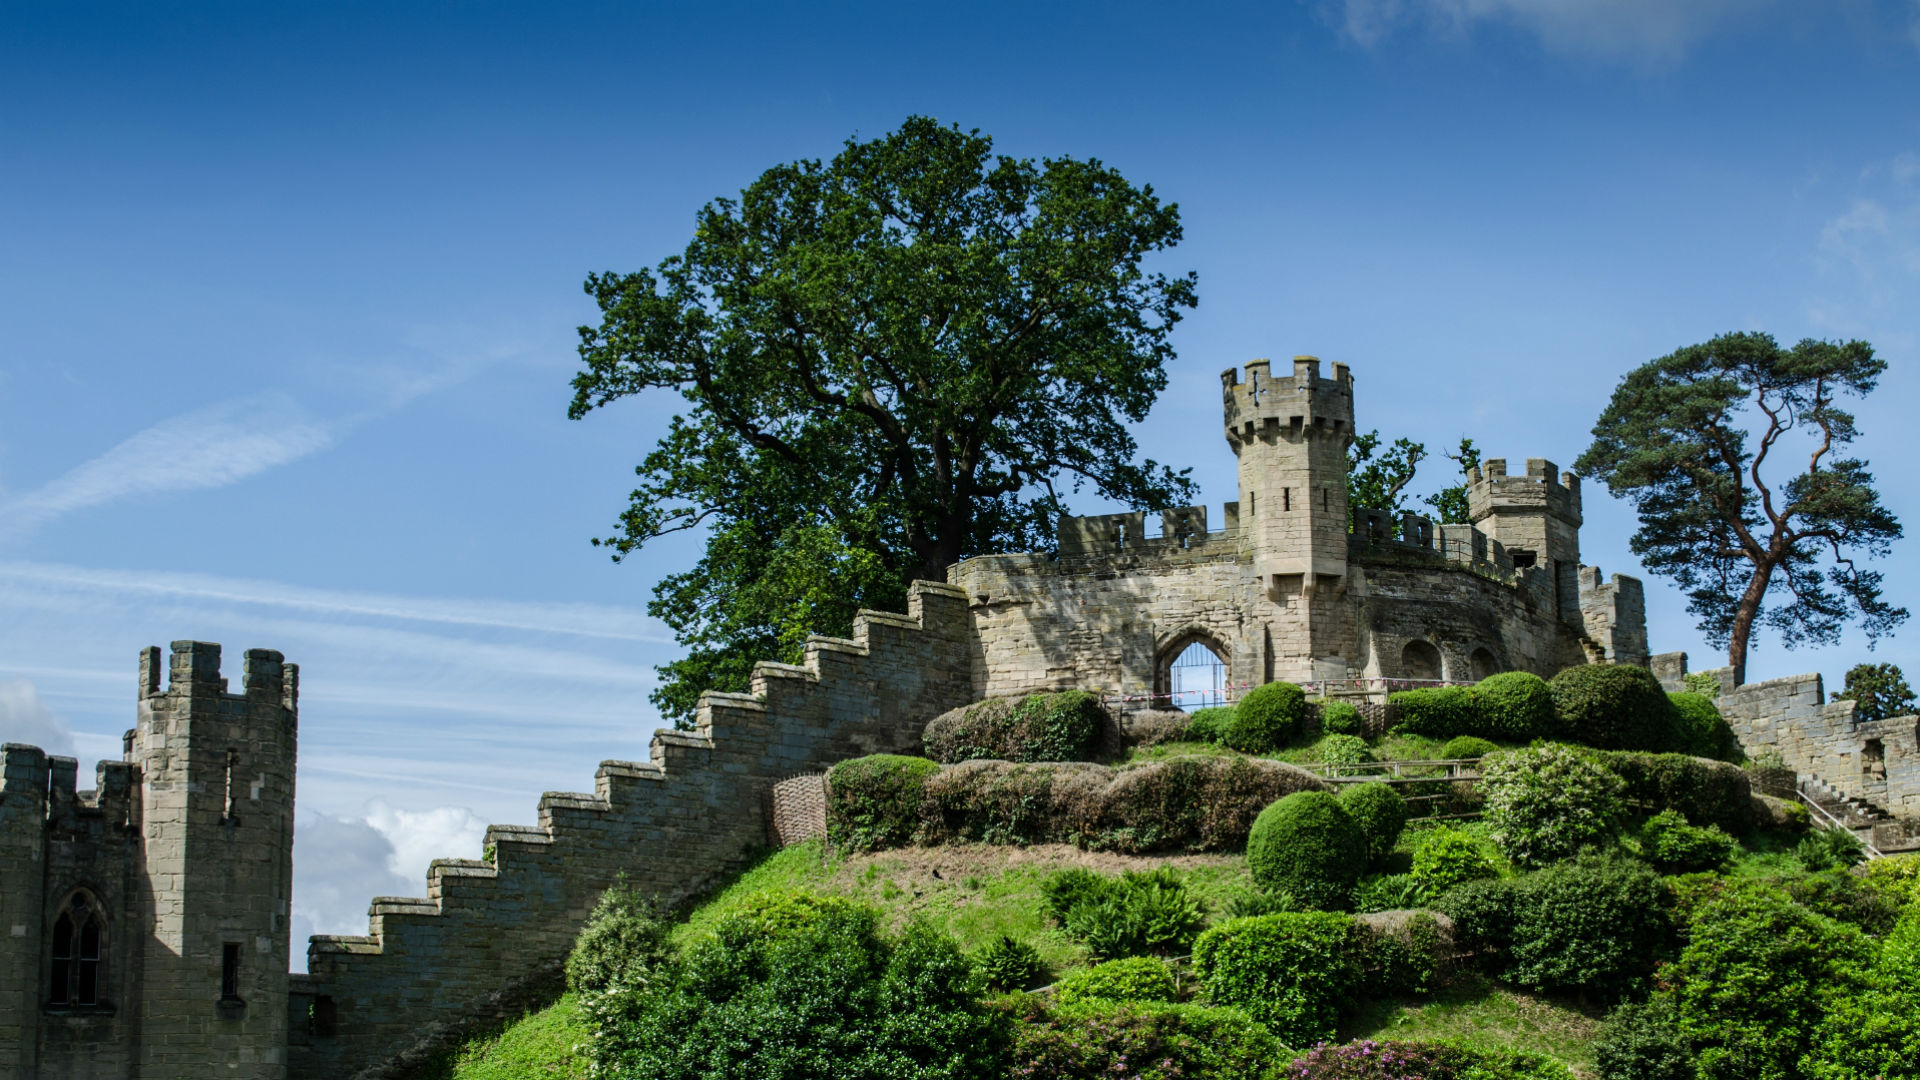 Photo of Warwich castle amongst green trees with blue sky in the background.